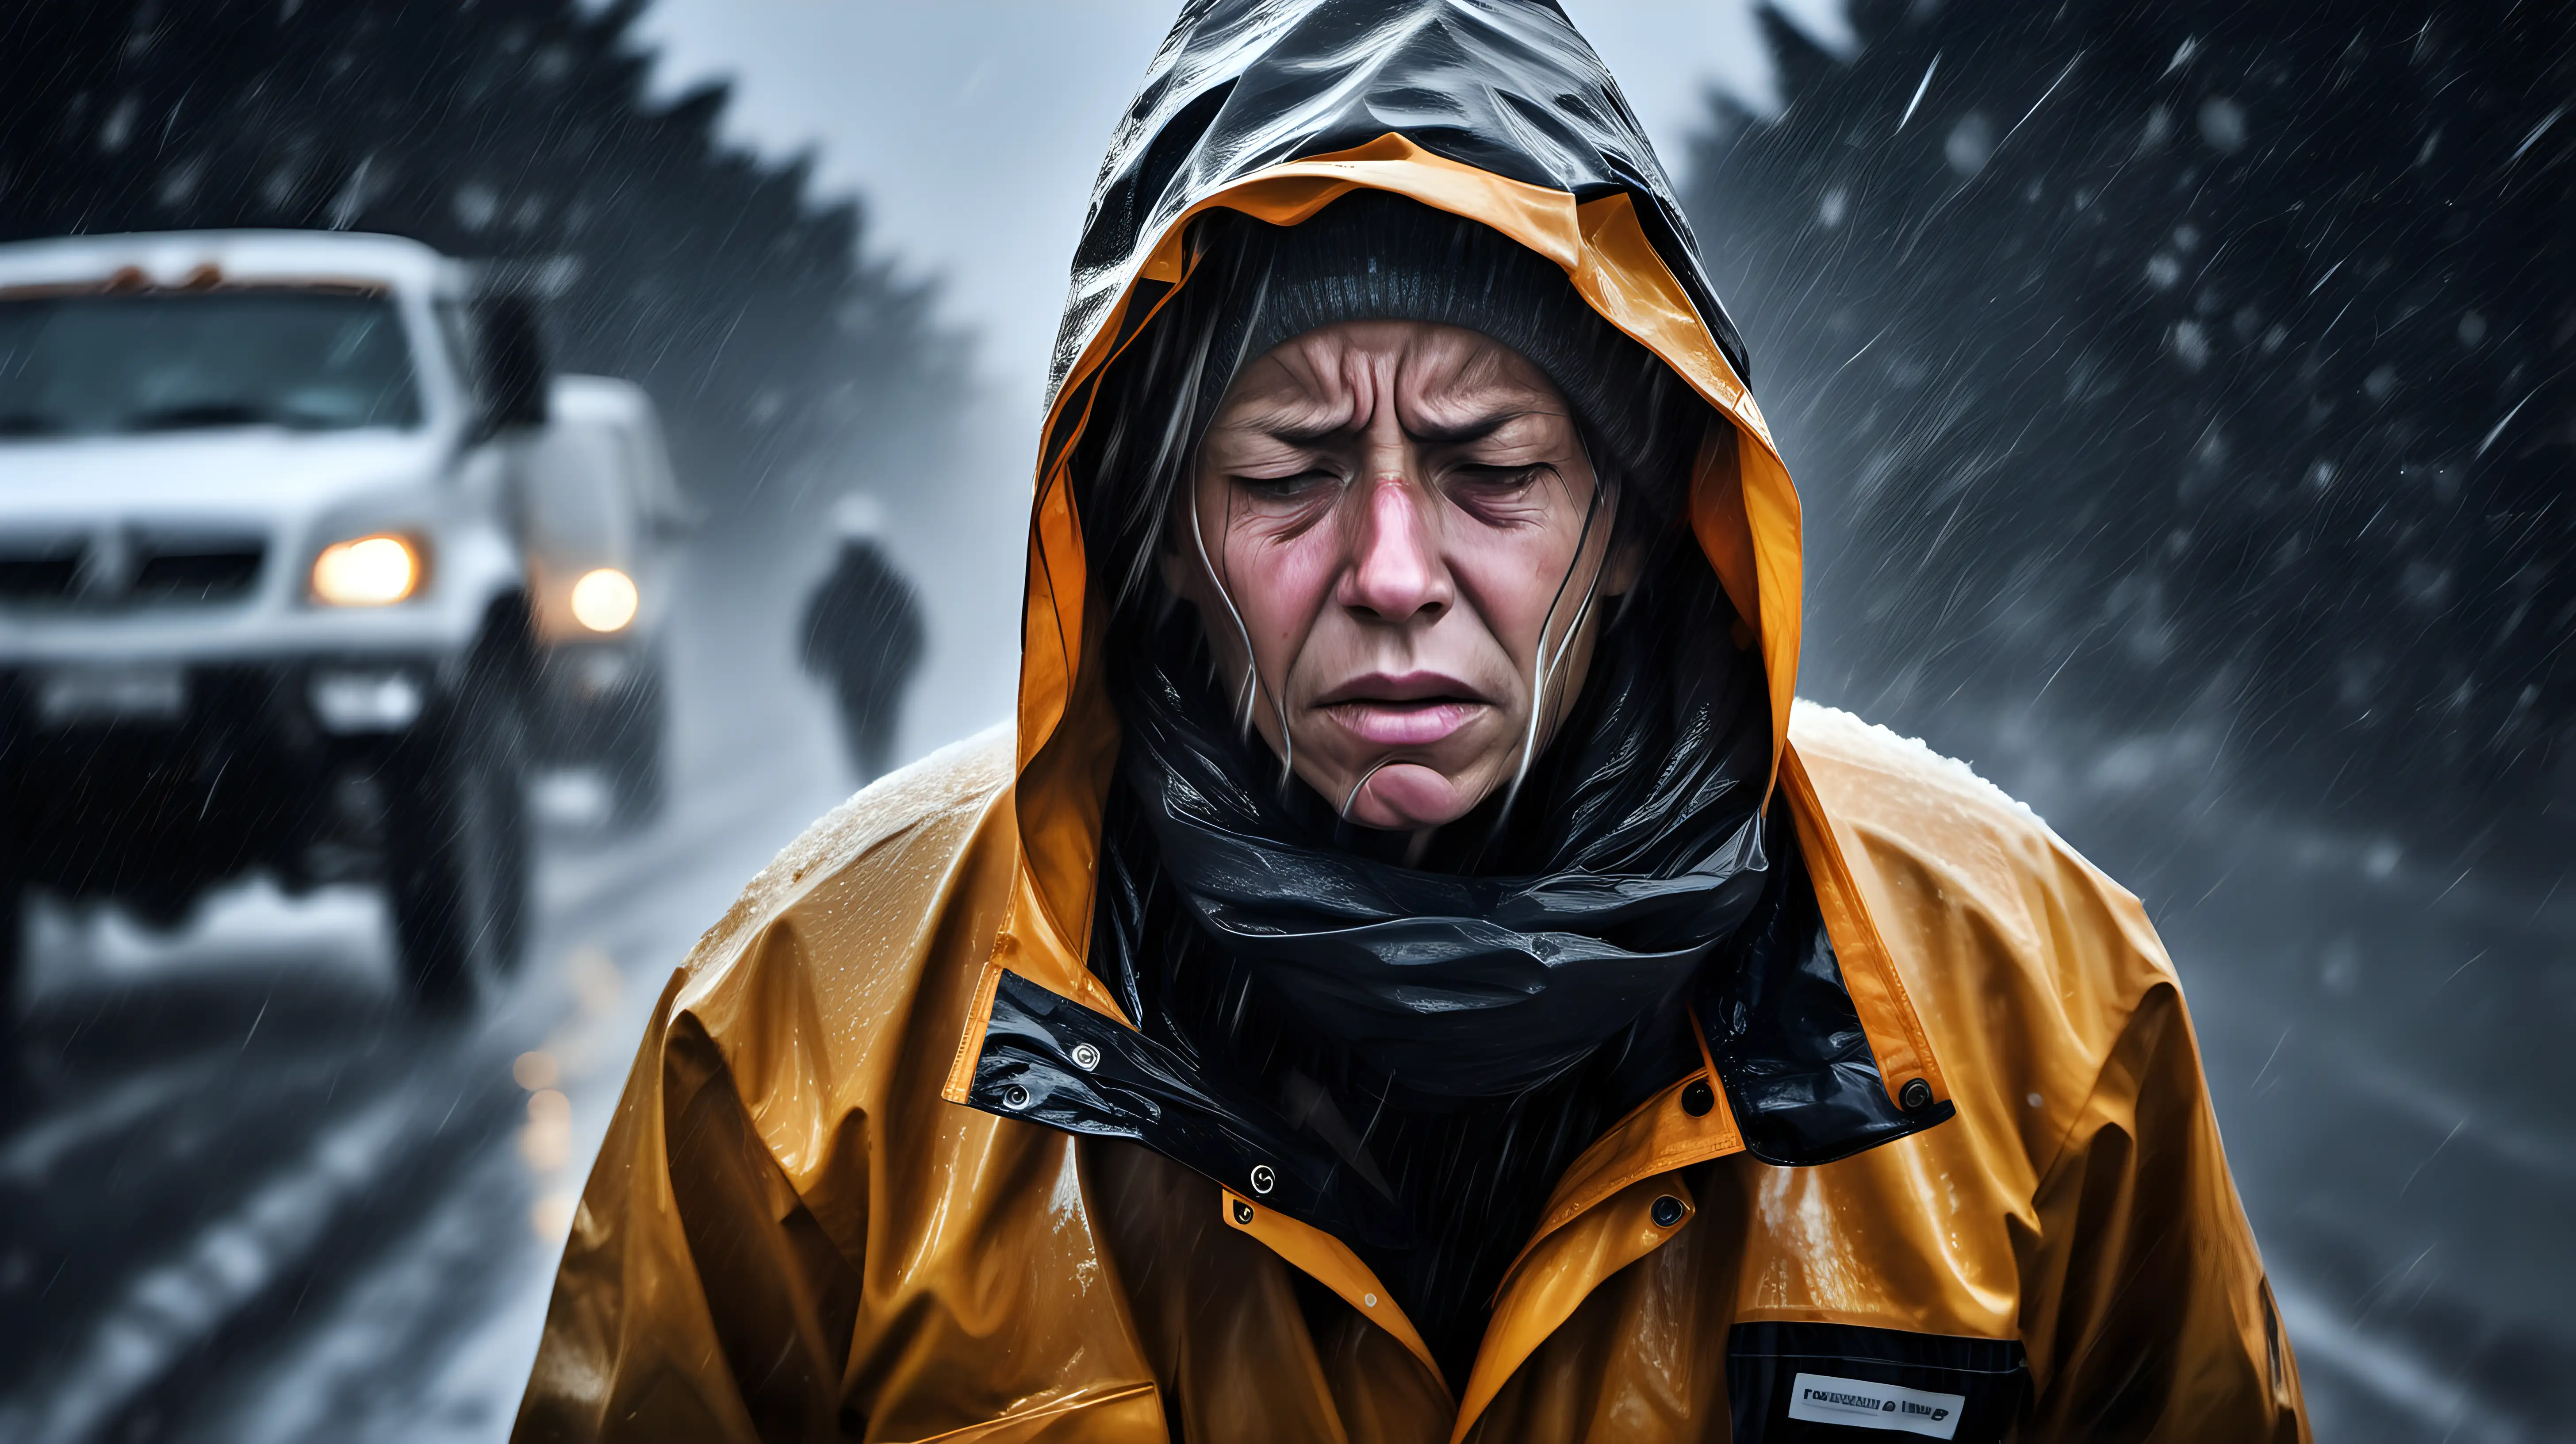 Capture the essence of a person working in adverse weather conditions, battling the elements with a tired but resolute expression, symbolizing the perseverance required in challenging circumstances.